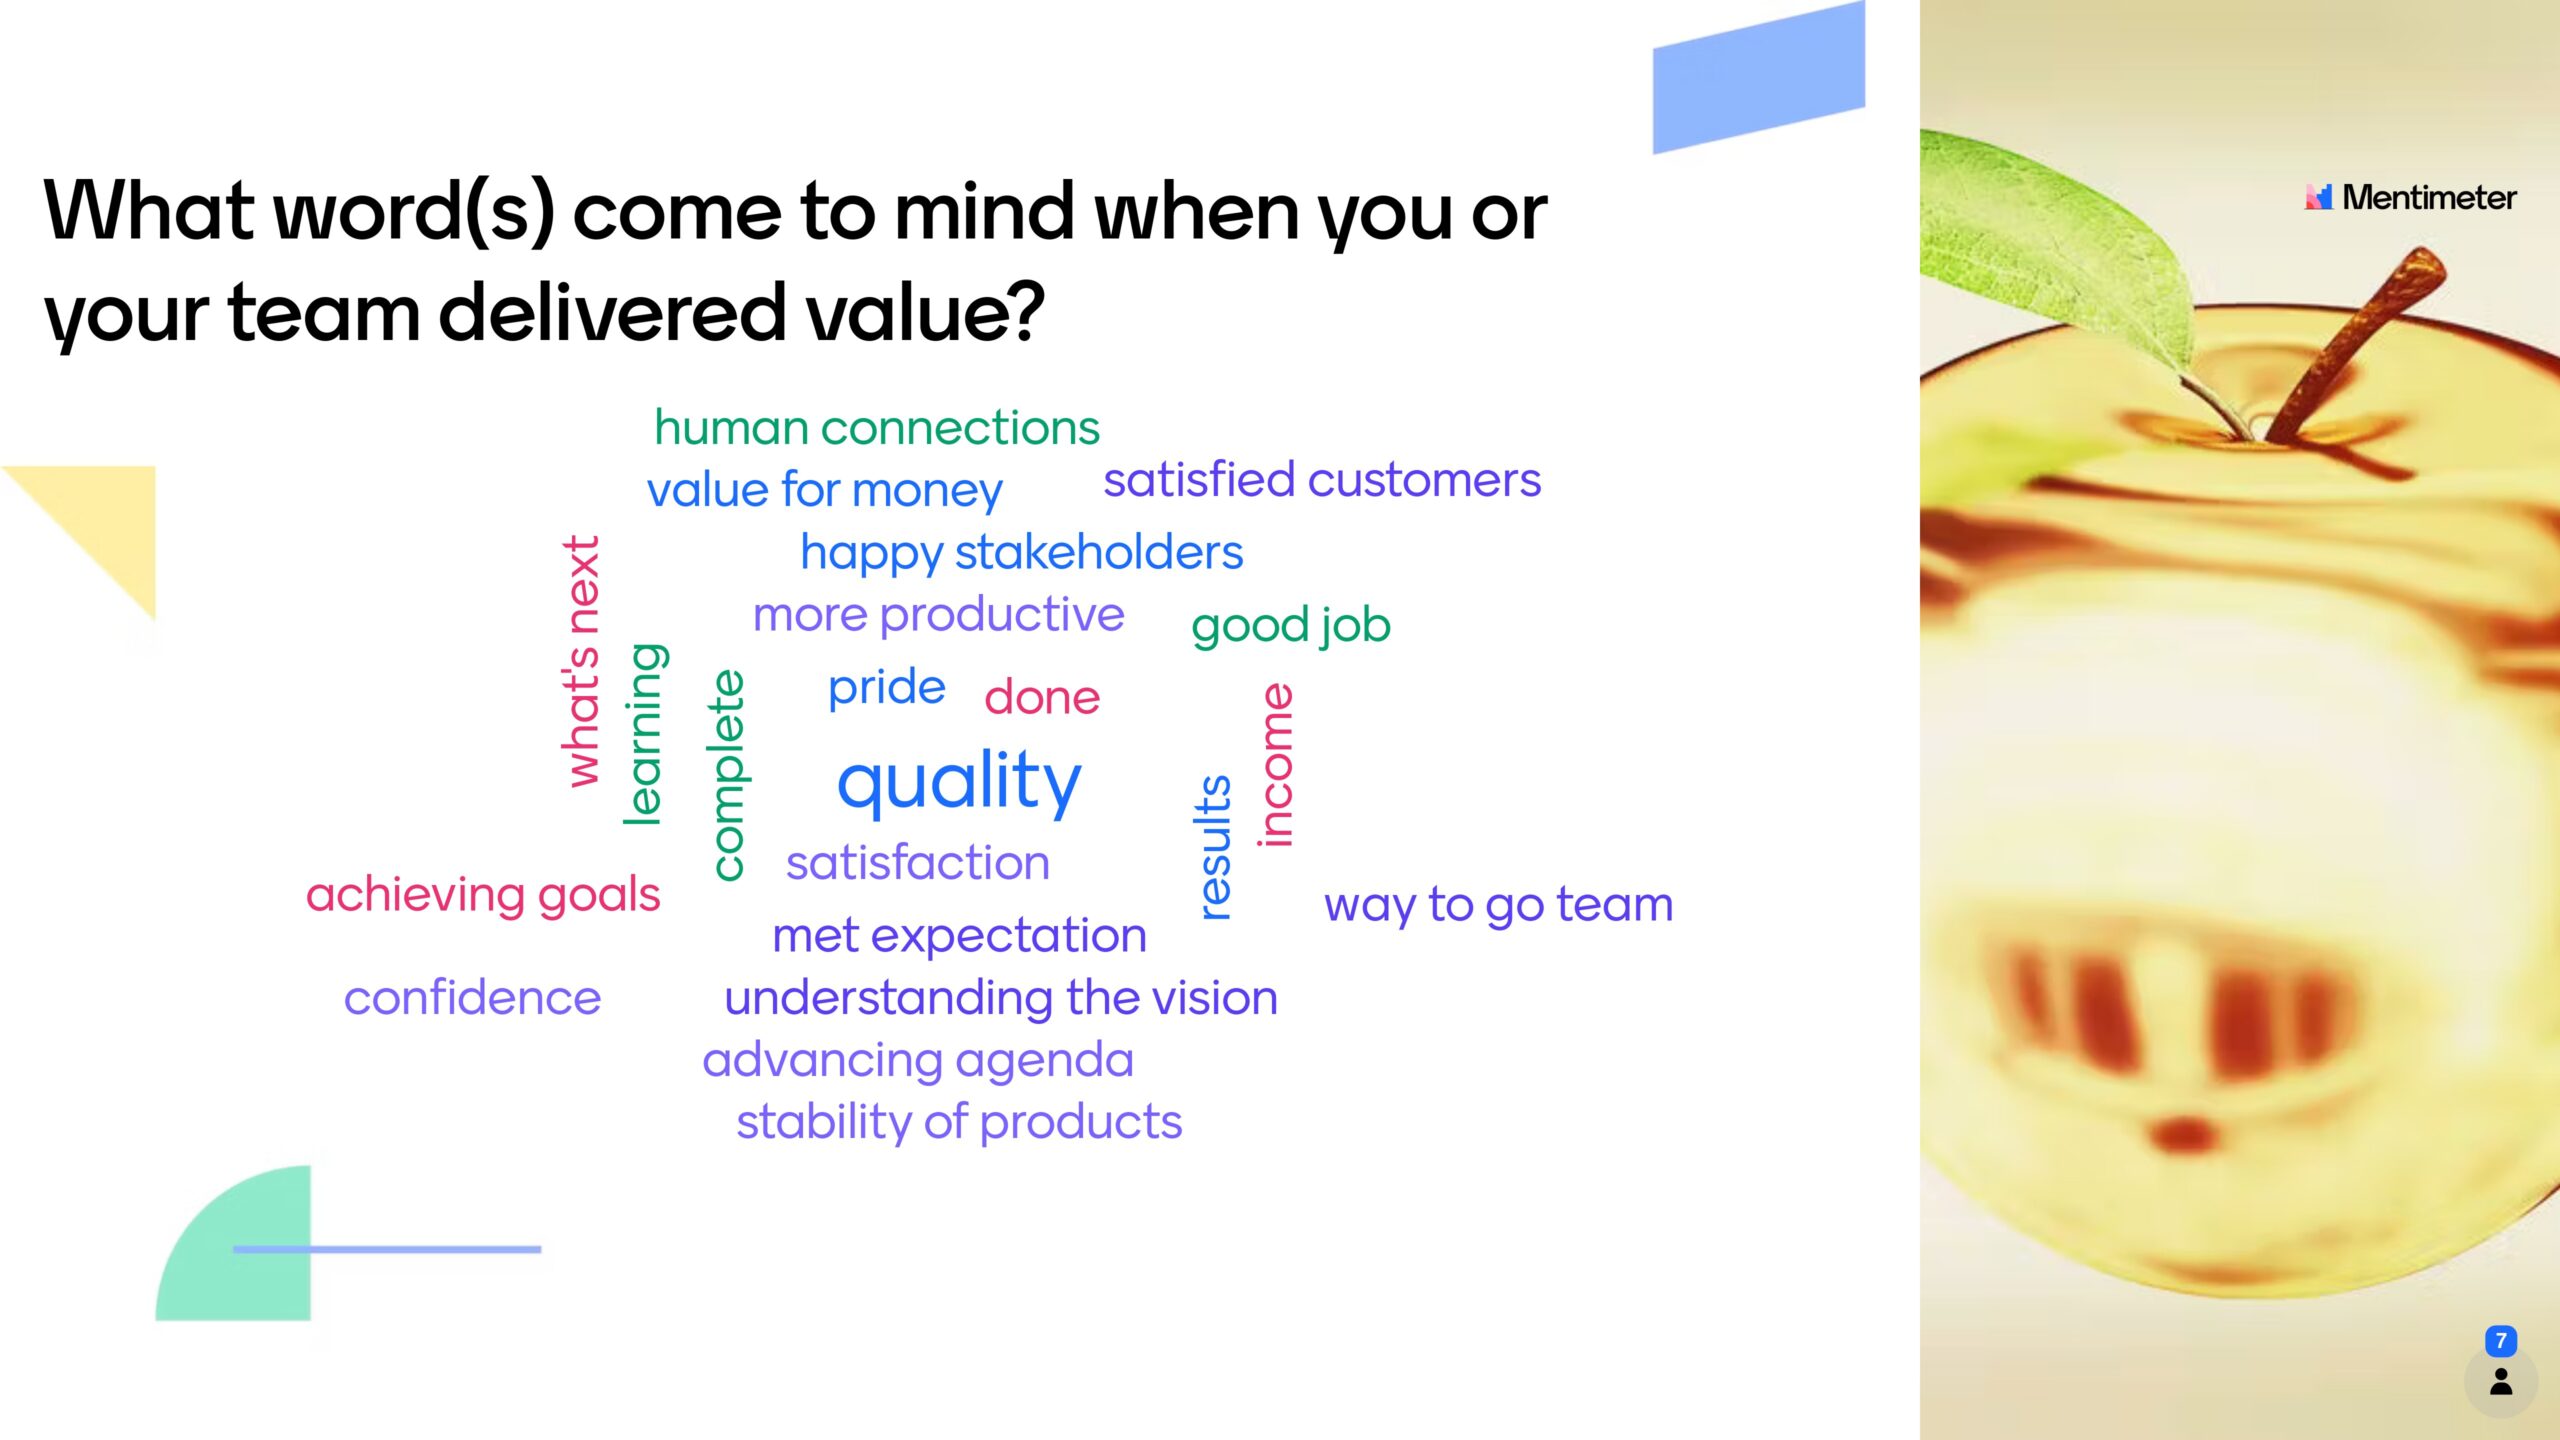 What words come to mind when you or your team delivered value